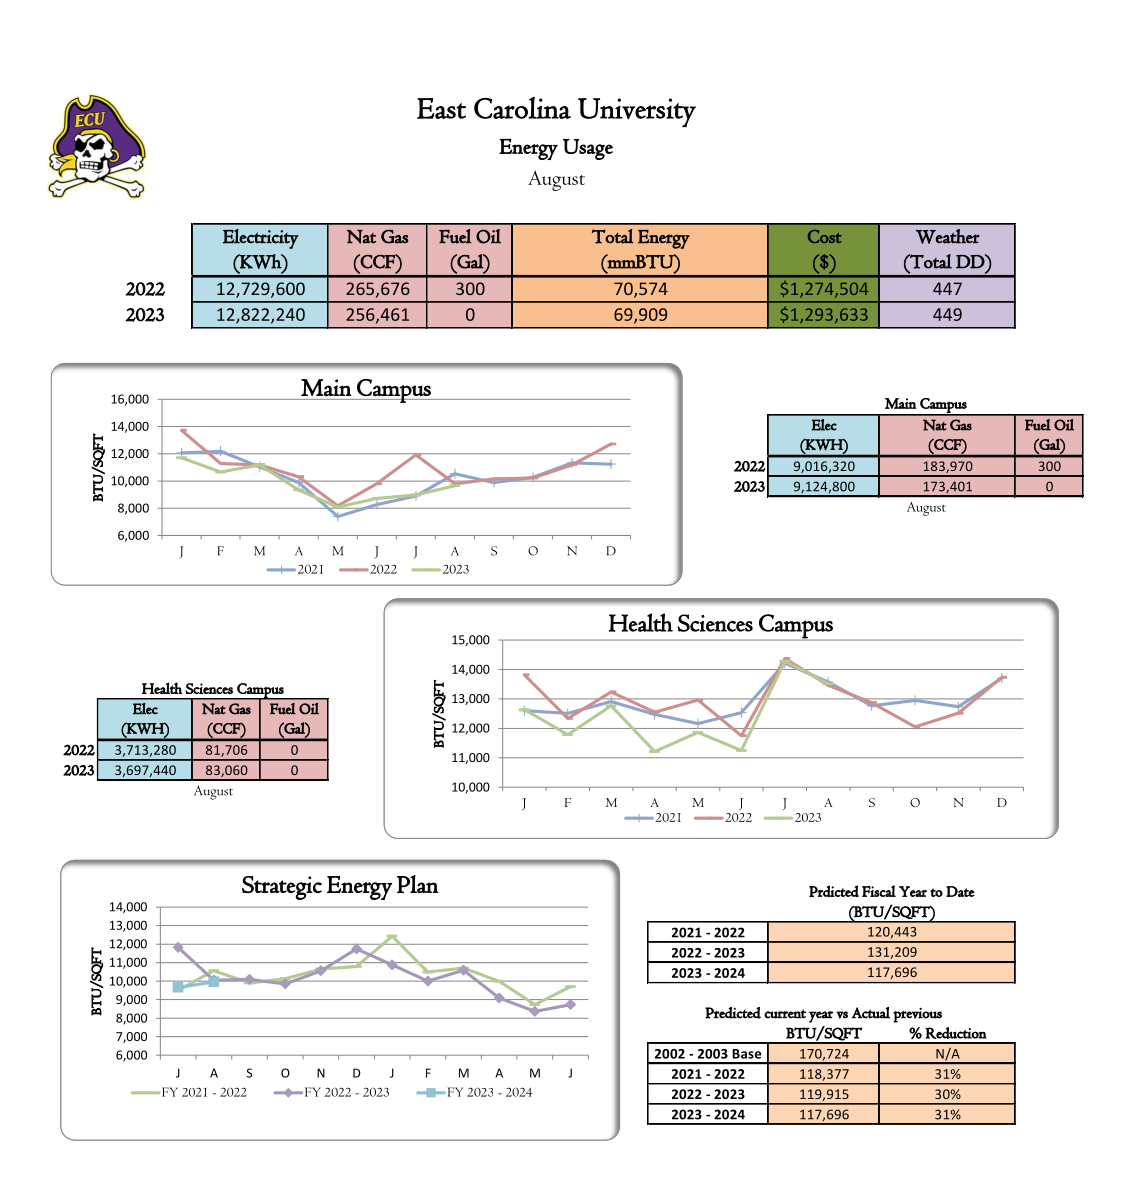 Tables and graphs showing the following differences between August 2022 and August 2023: Electricity use increased by 92,640 KWh; Natural Gas usage decreased by 9,215 CCF; Fuel oil usage decreased by 300 gallons; total energy usage decreased by 665 MMBtu; cost increased by $19,129